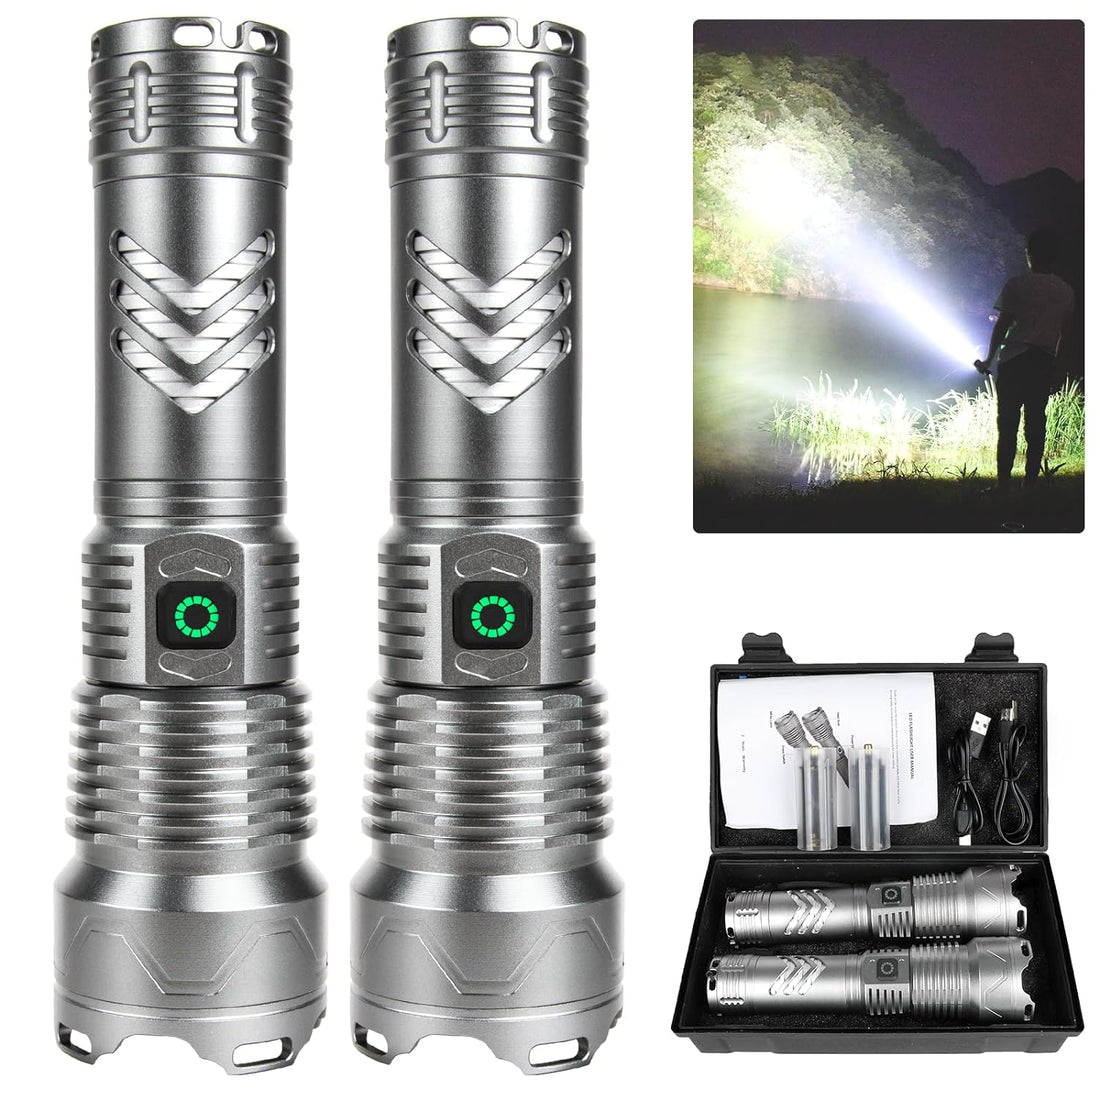 FUROLD Rechargeable Flashlights High Lumens, 200000 Super Bright LED Flashlight Powerful Flash Light,5 Modes, IPX6 Waterproof,Handheld Flash Lights for Outdoor Emergency Camping Hiking